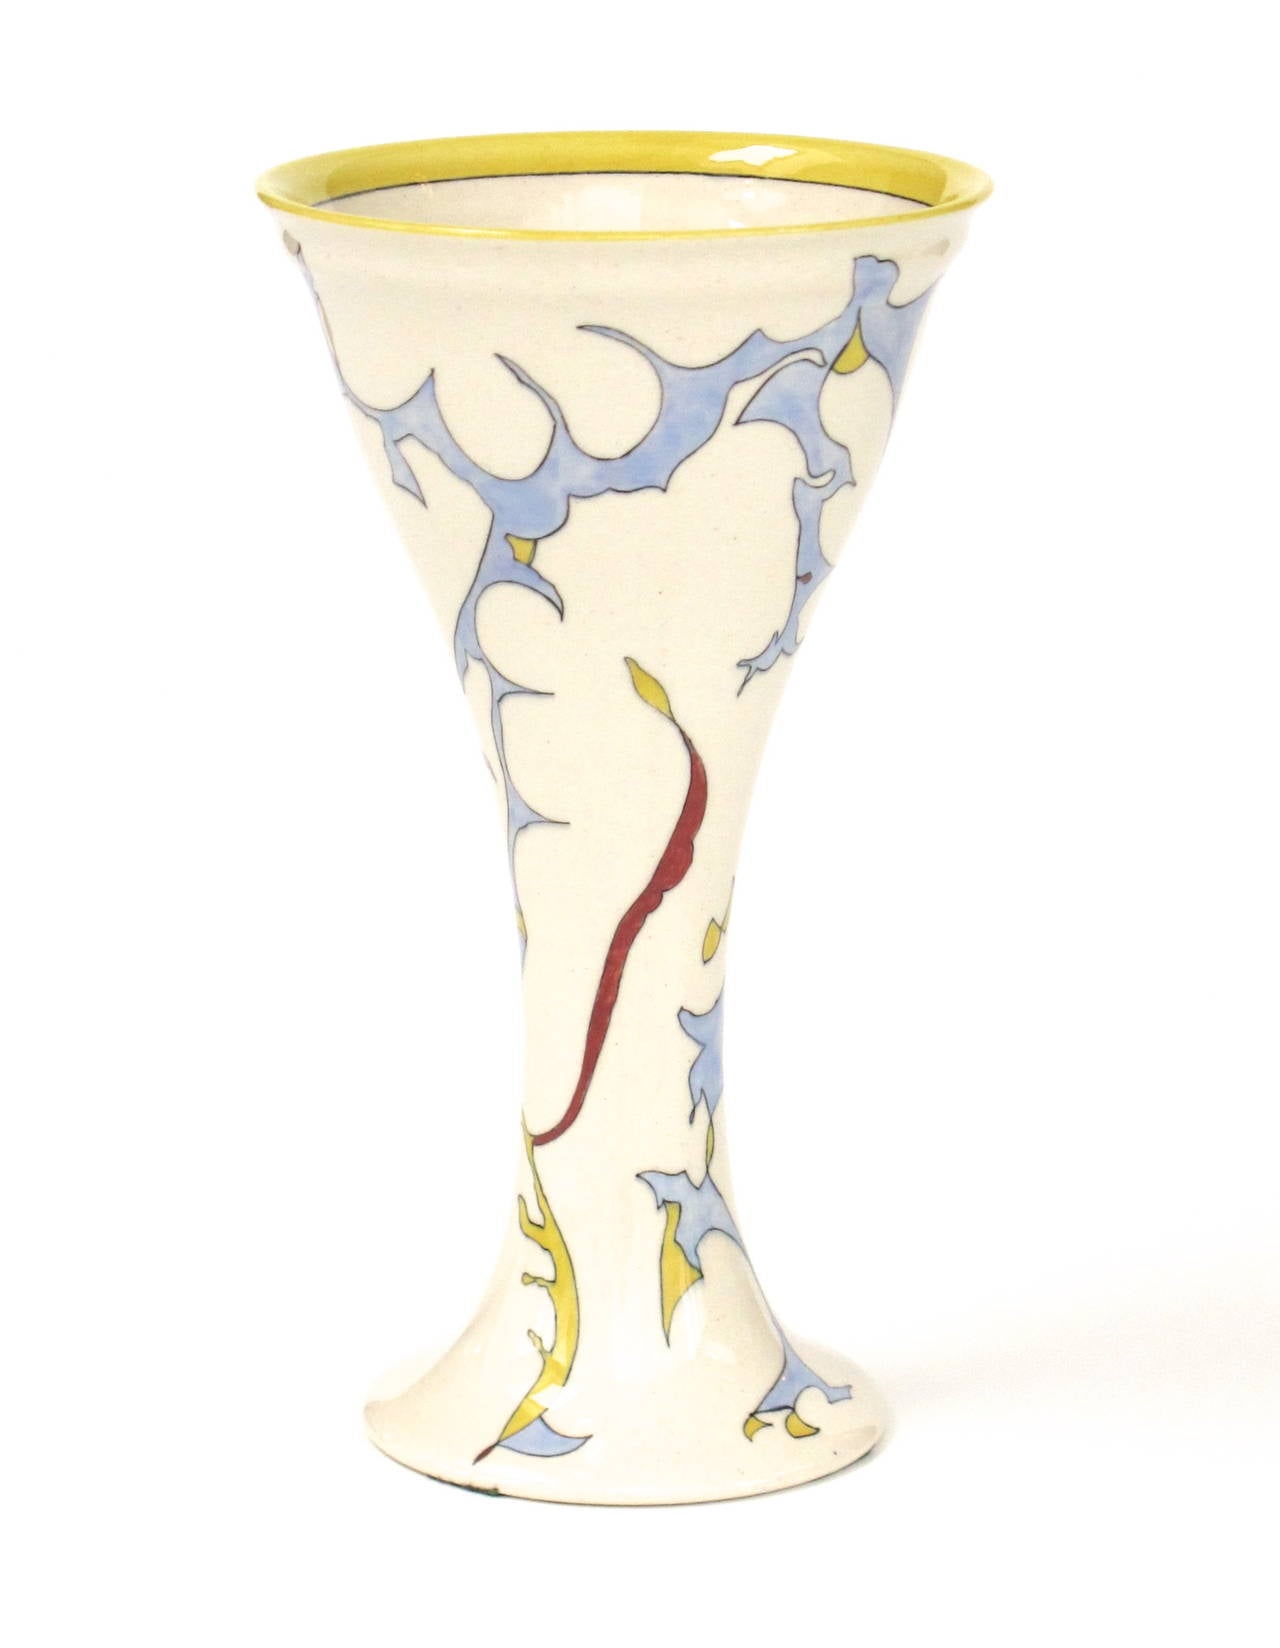 Art Deco flower pot designed by Theo Colenbrander for Plateelbakkerij Ram (RAM pottery in Arnhem, The Netherlands). The pattern called Spichtig (Weedy) was hand-painted on the earthenware vase by painter Jan Branger. It was manufactured in 1924 and